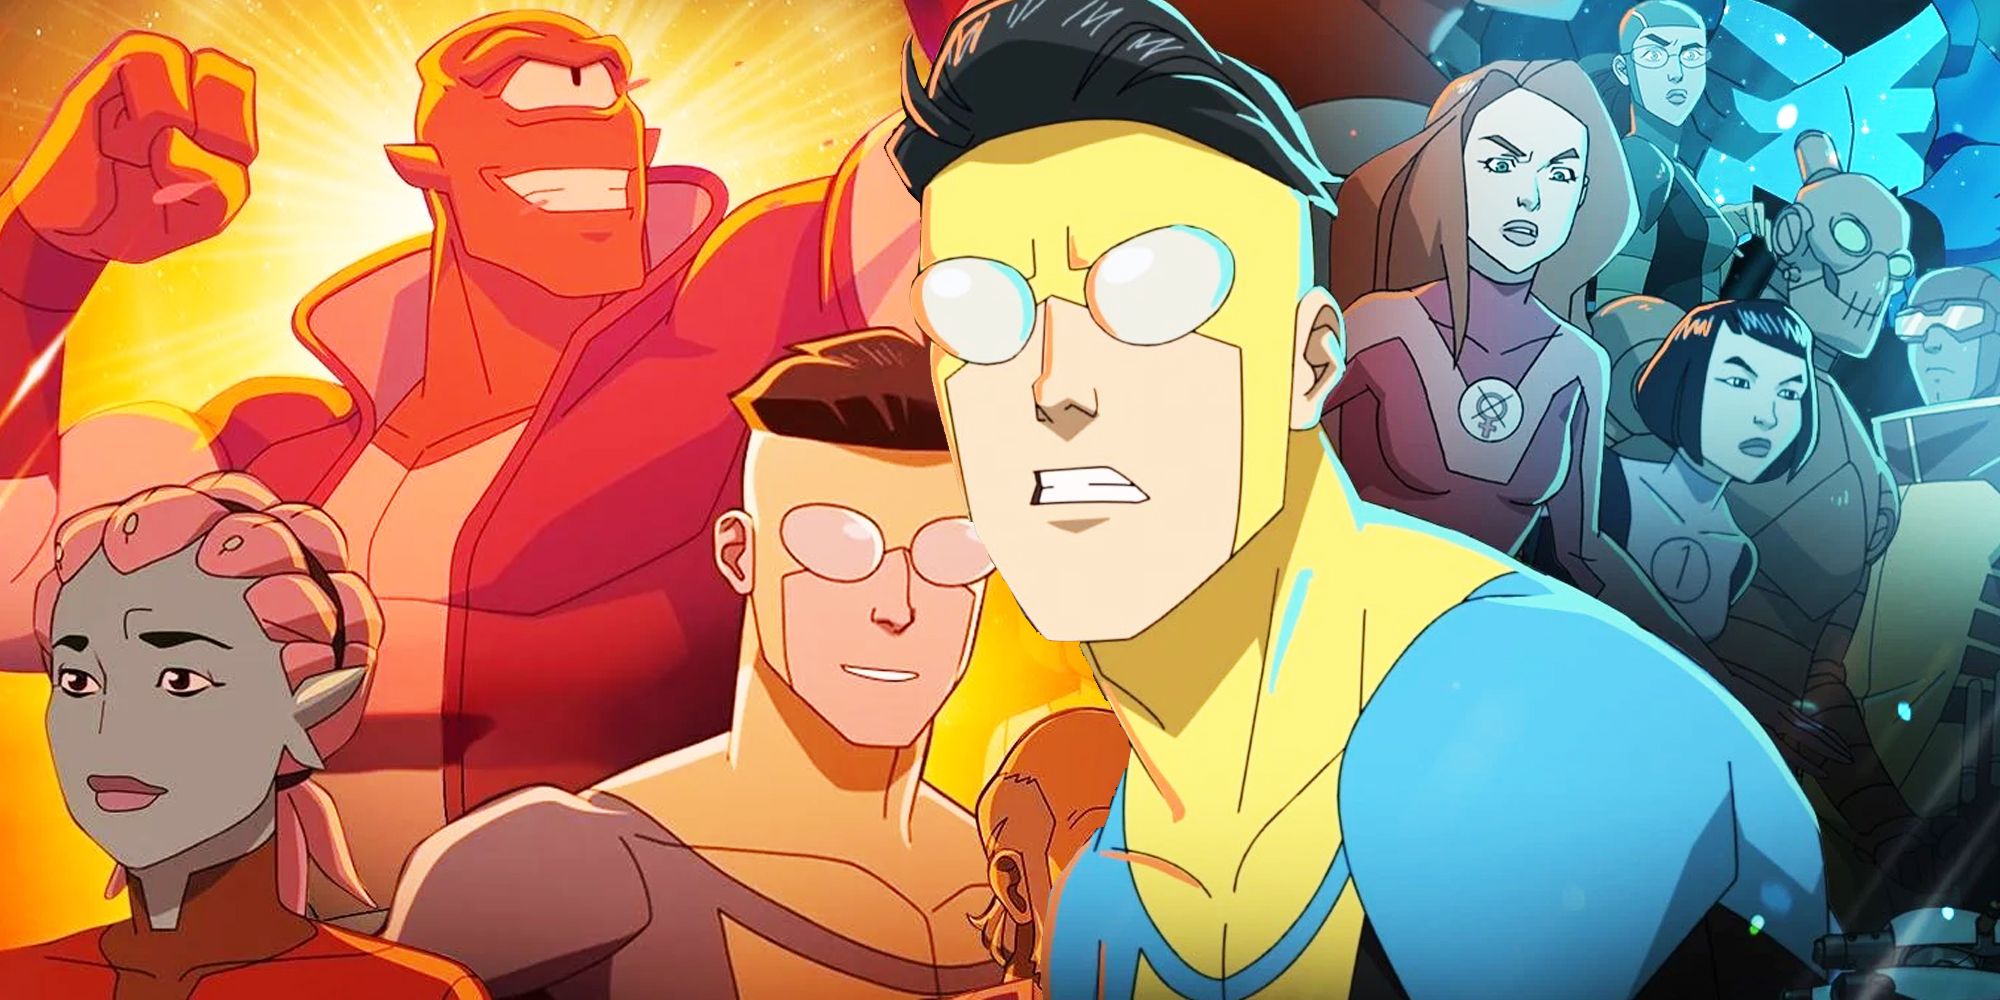 Invincible Season 2, Part 2 Trailer Sets Up The Comic’s Most Controversial Storyline